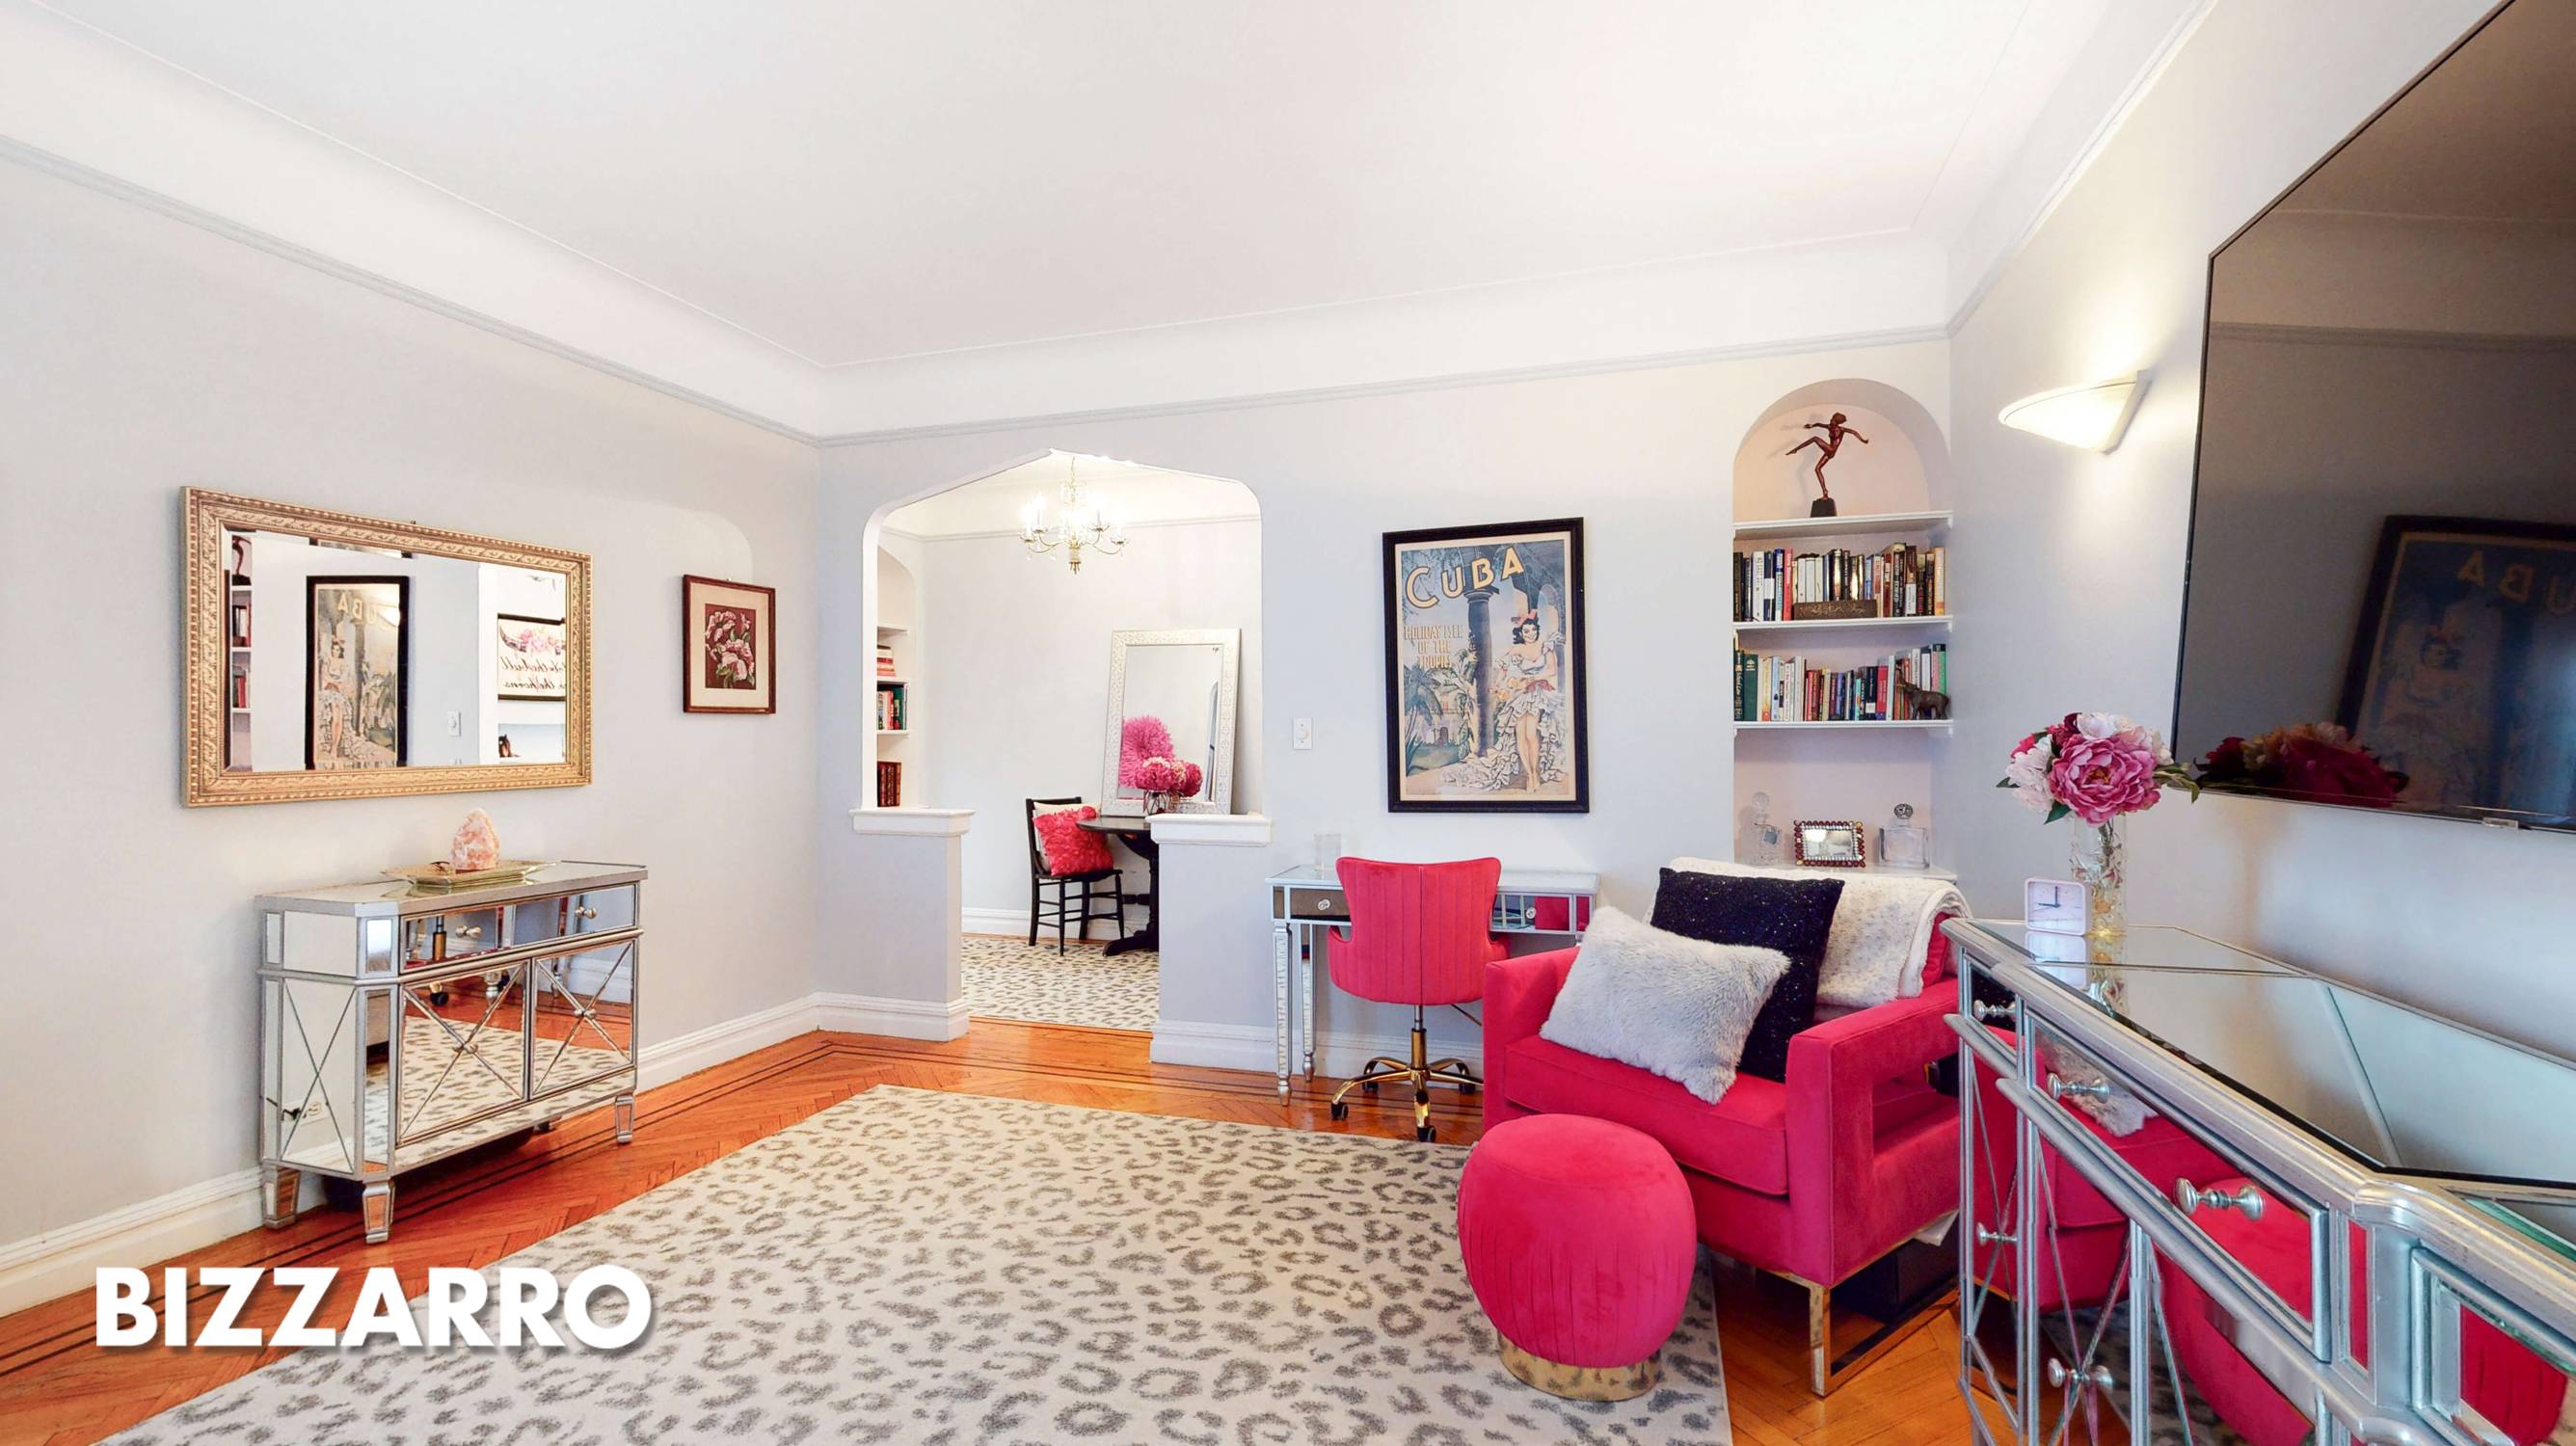 1BR Art Deco Classic ! ! Something special awaits, at this one bedroom cooperative apartment at one of Inwood classic Art Deco buildings.